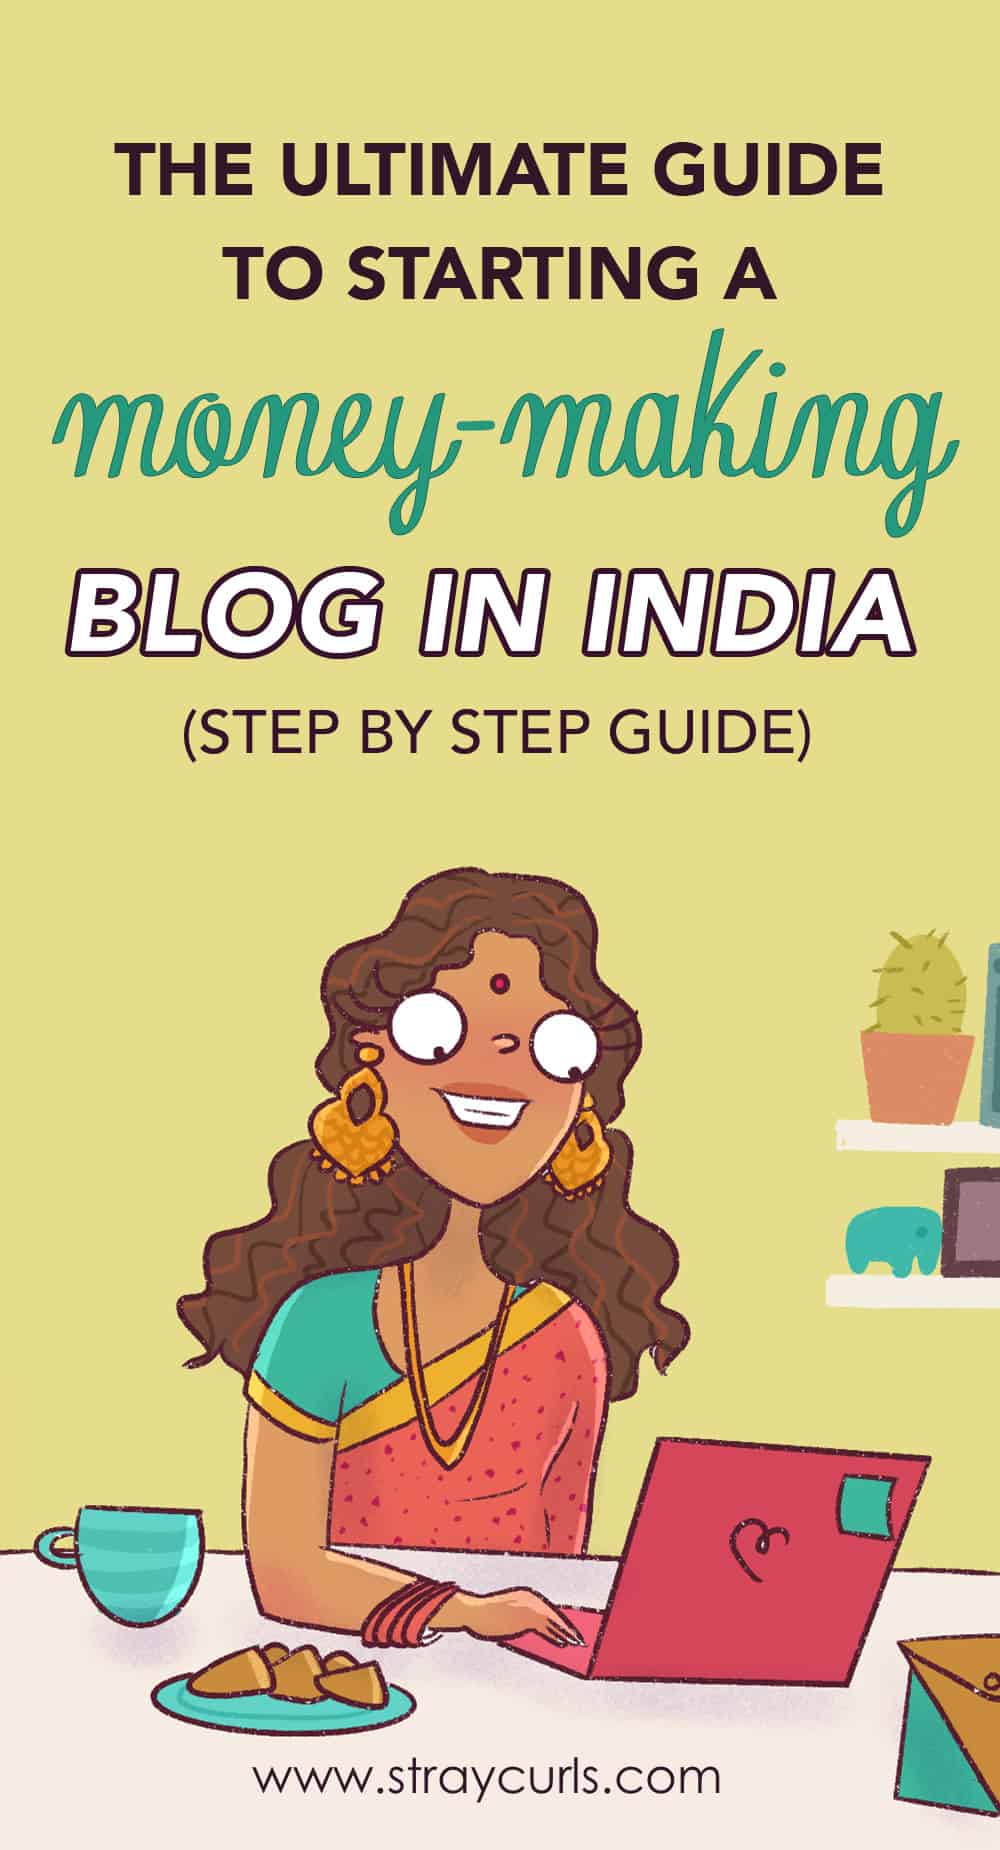 Learn how to start a blog in India step by step